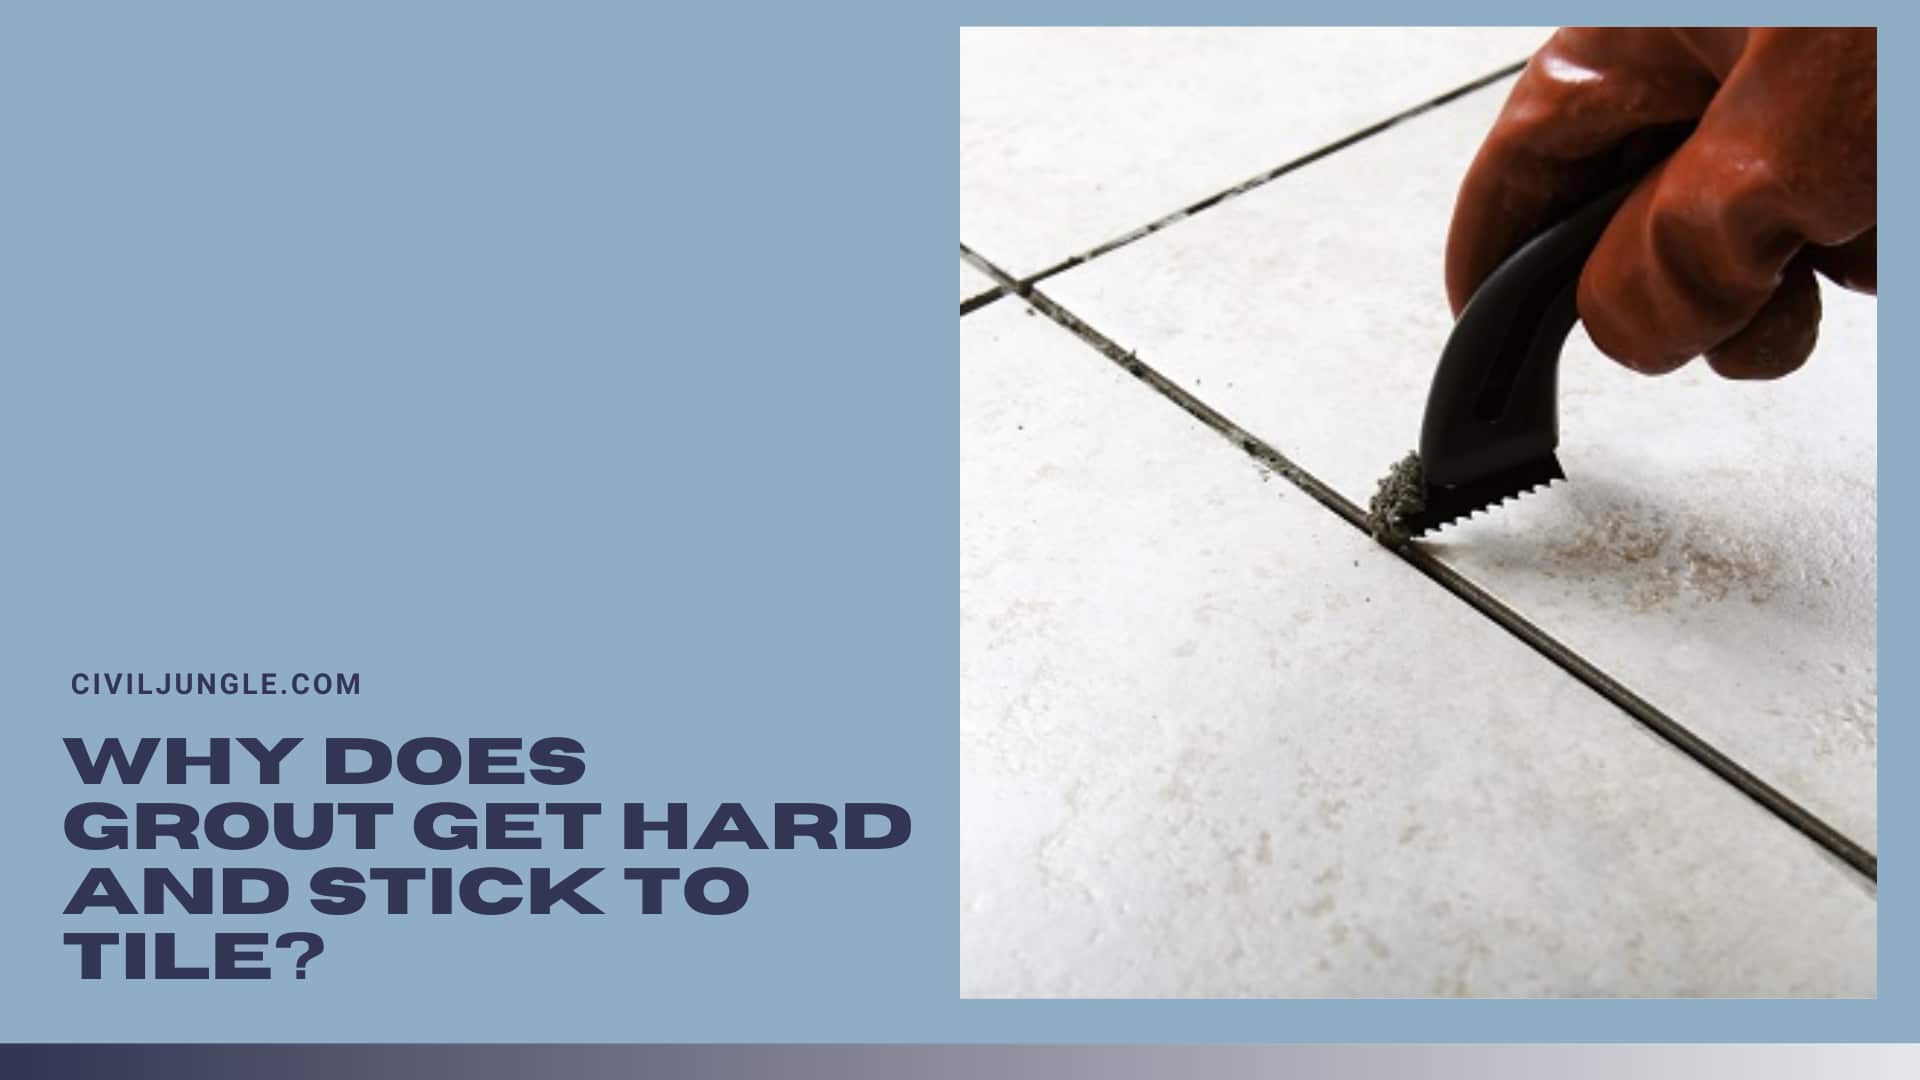 Why Does Grout Get Hard And Stick To Tile?